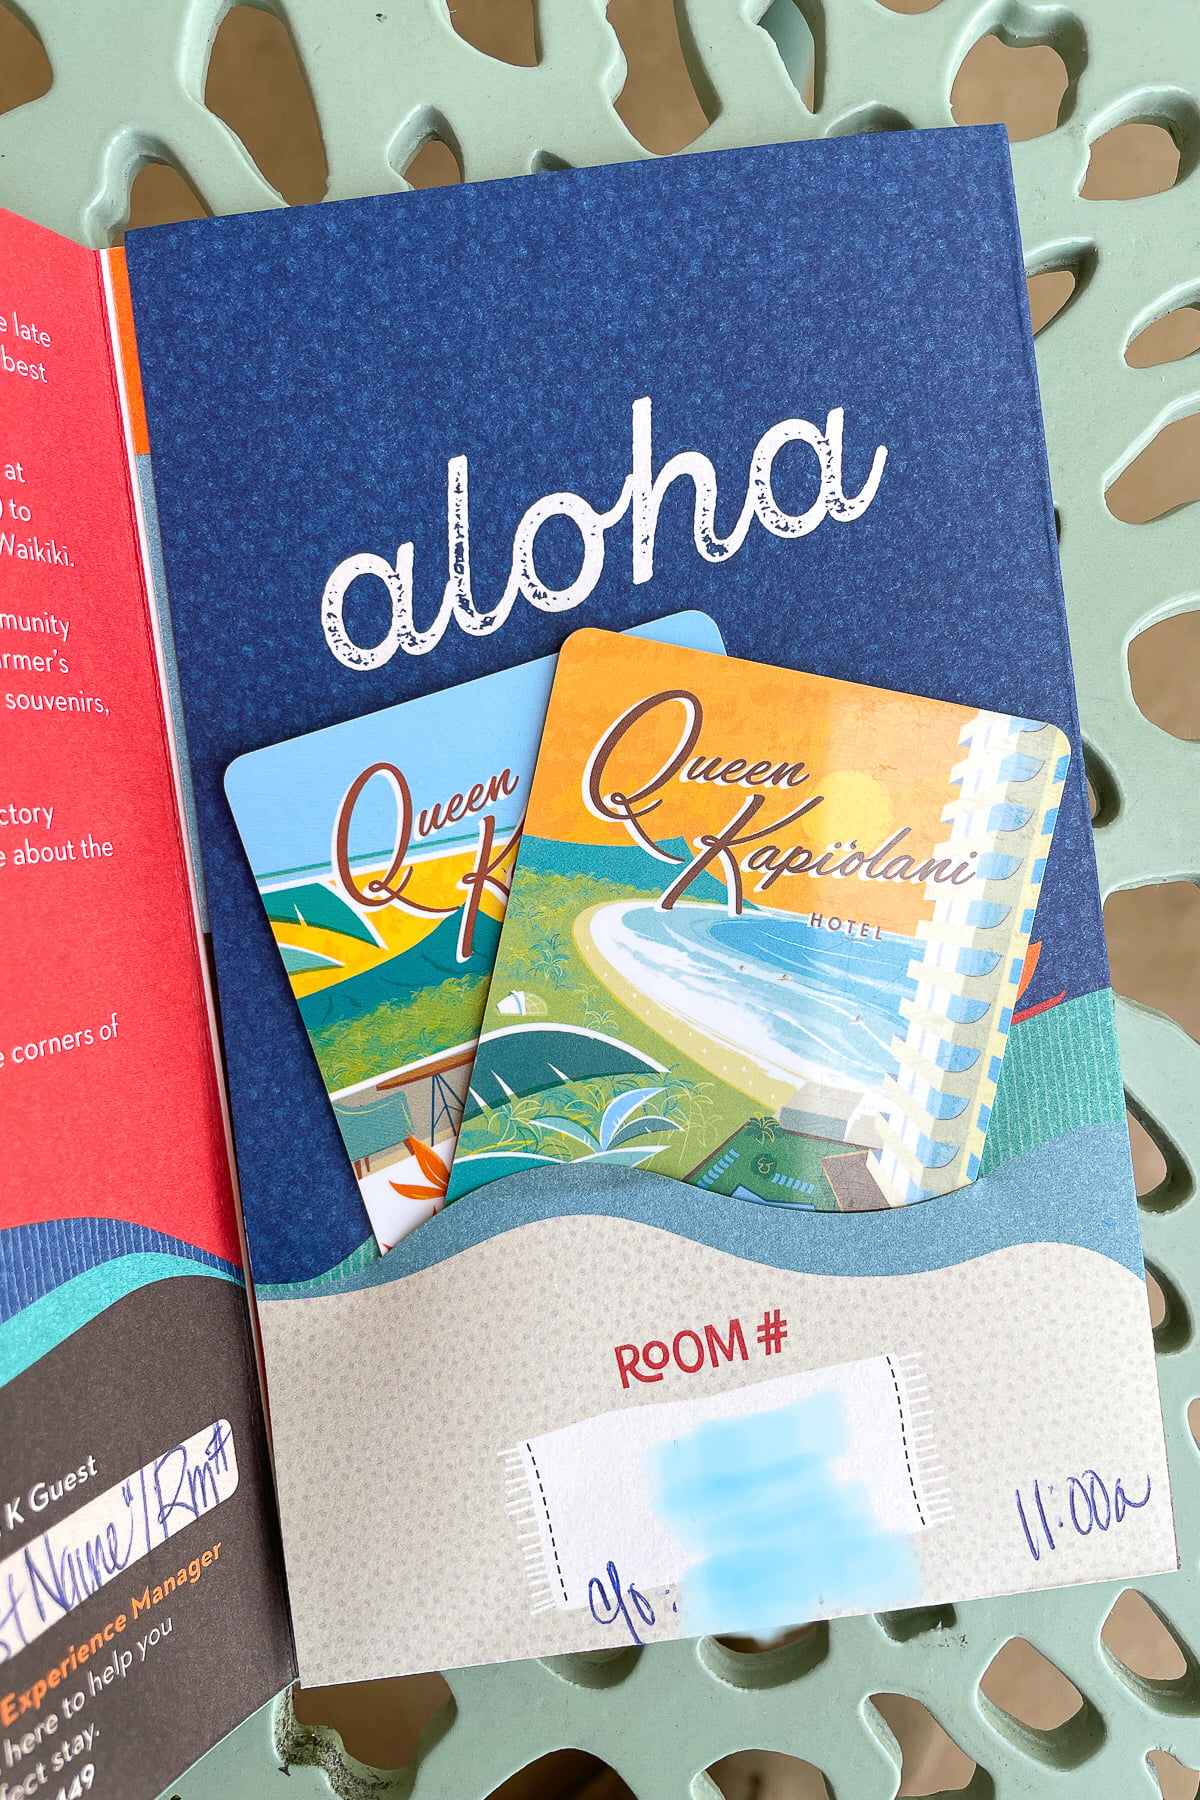 Room cards at the Queen Kapiolani Hotel.